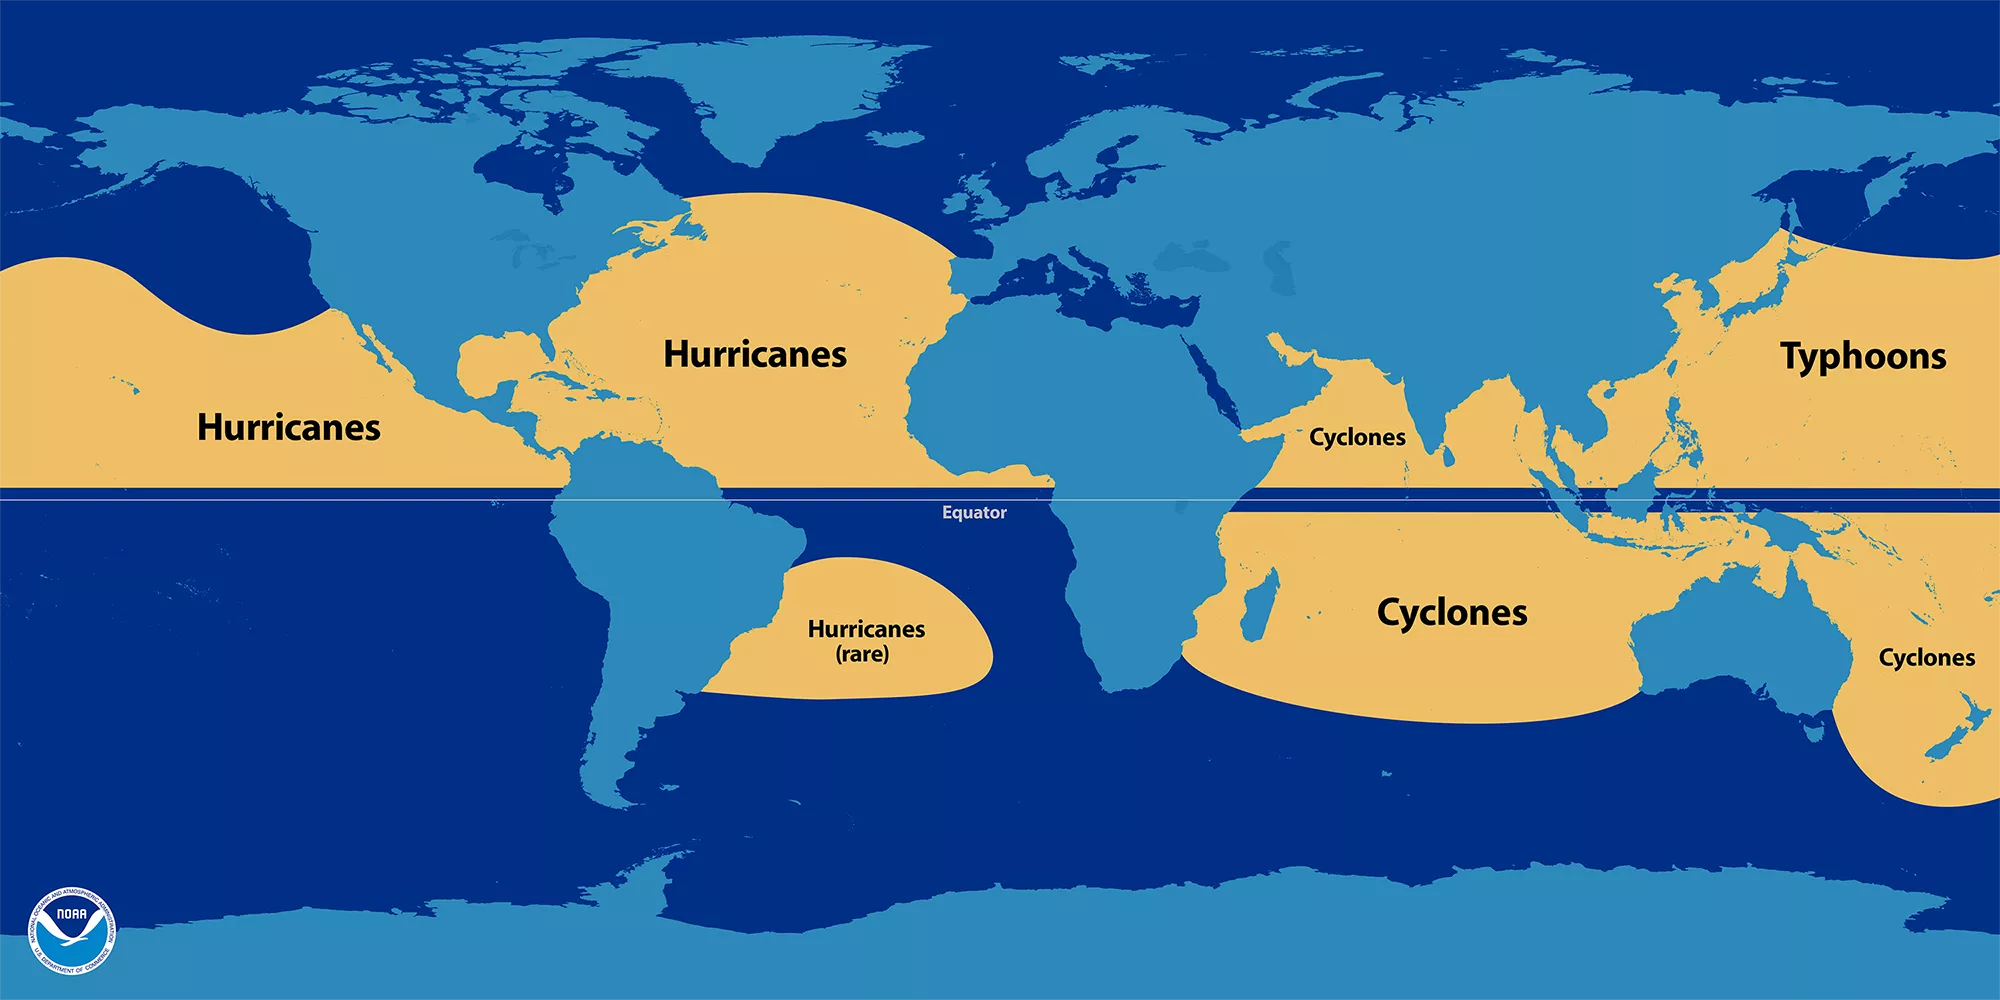 Different regions call tropical cyclones by different names.